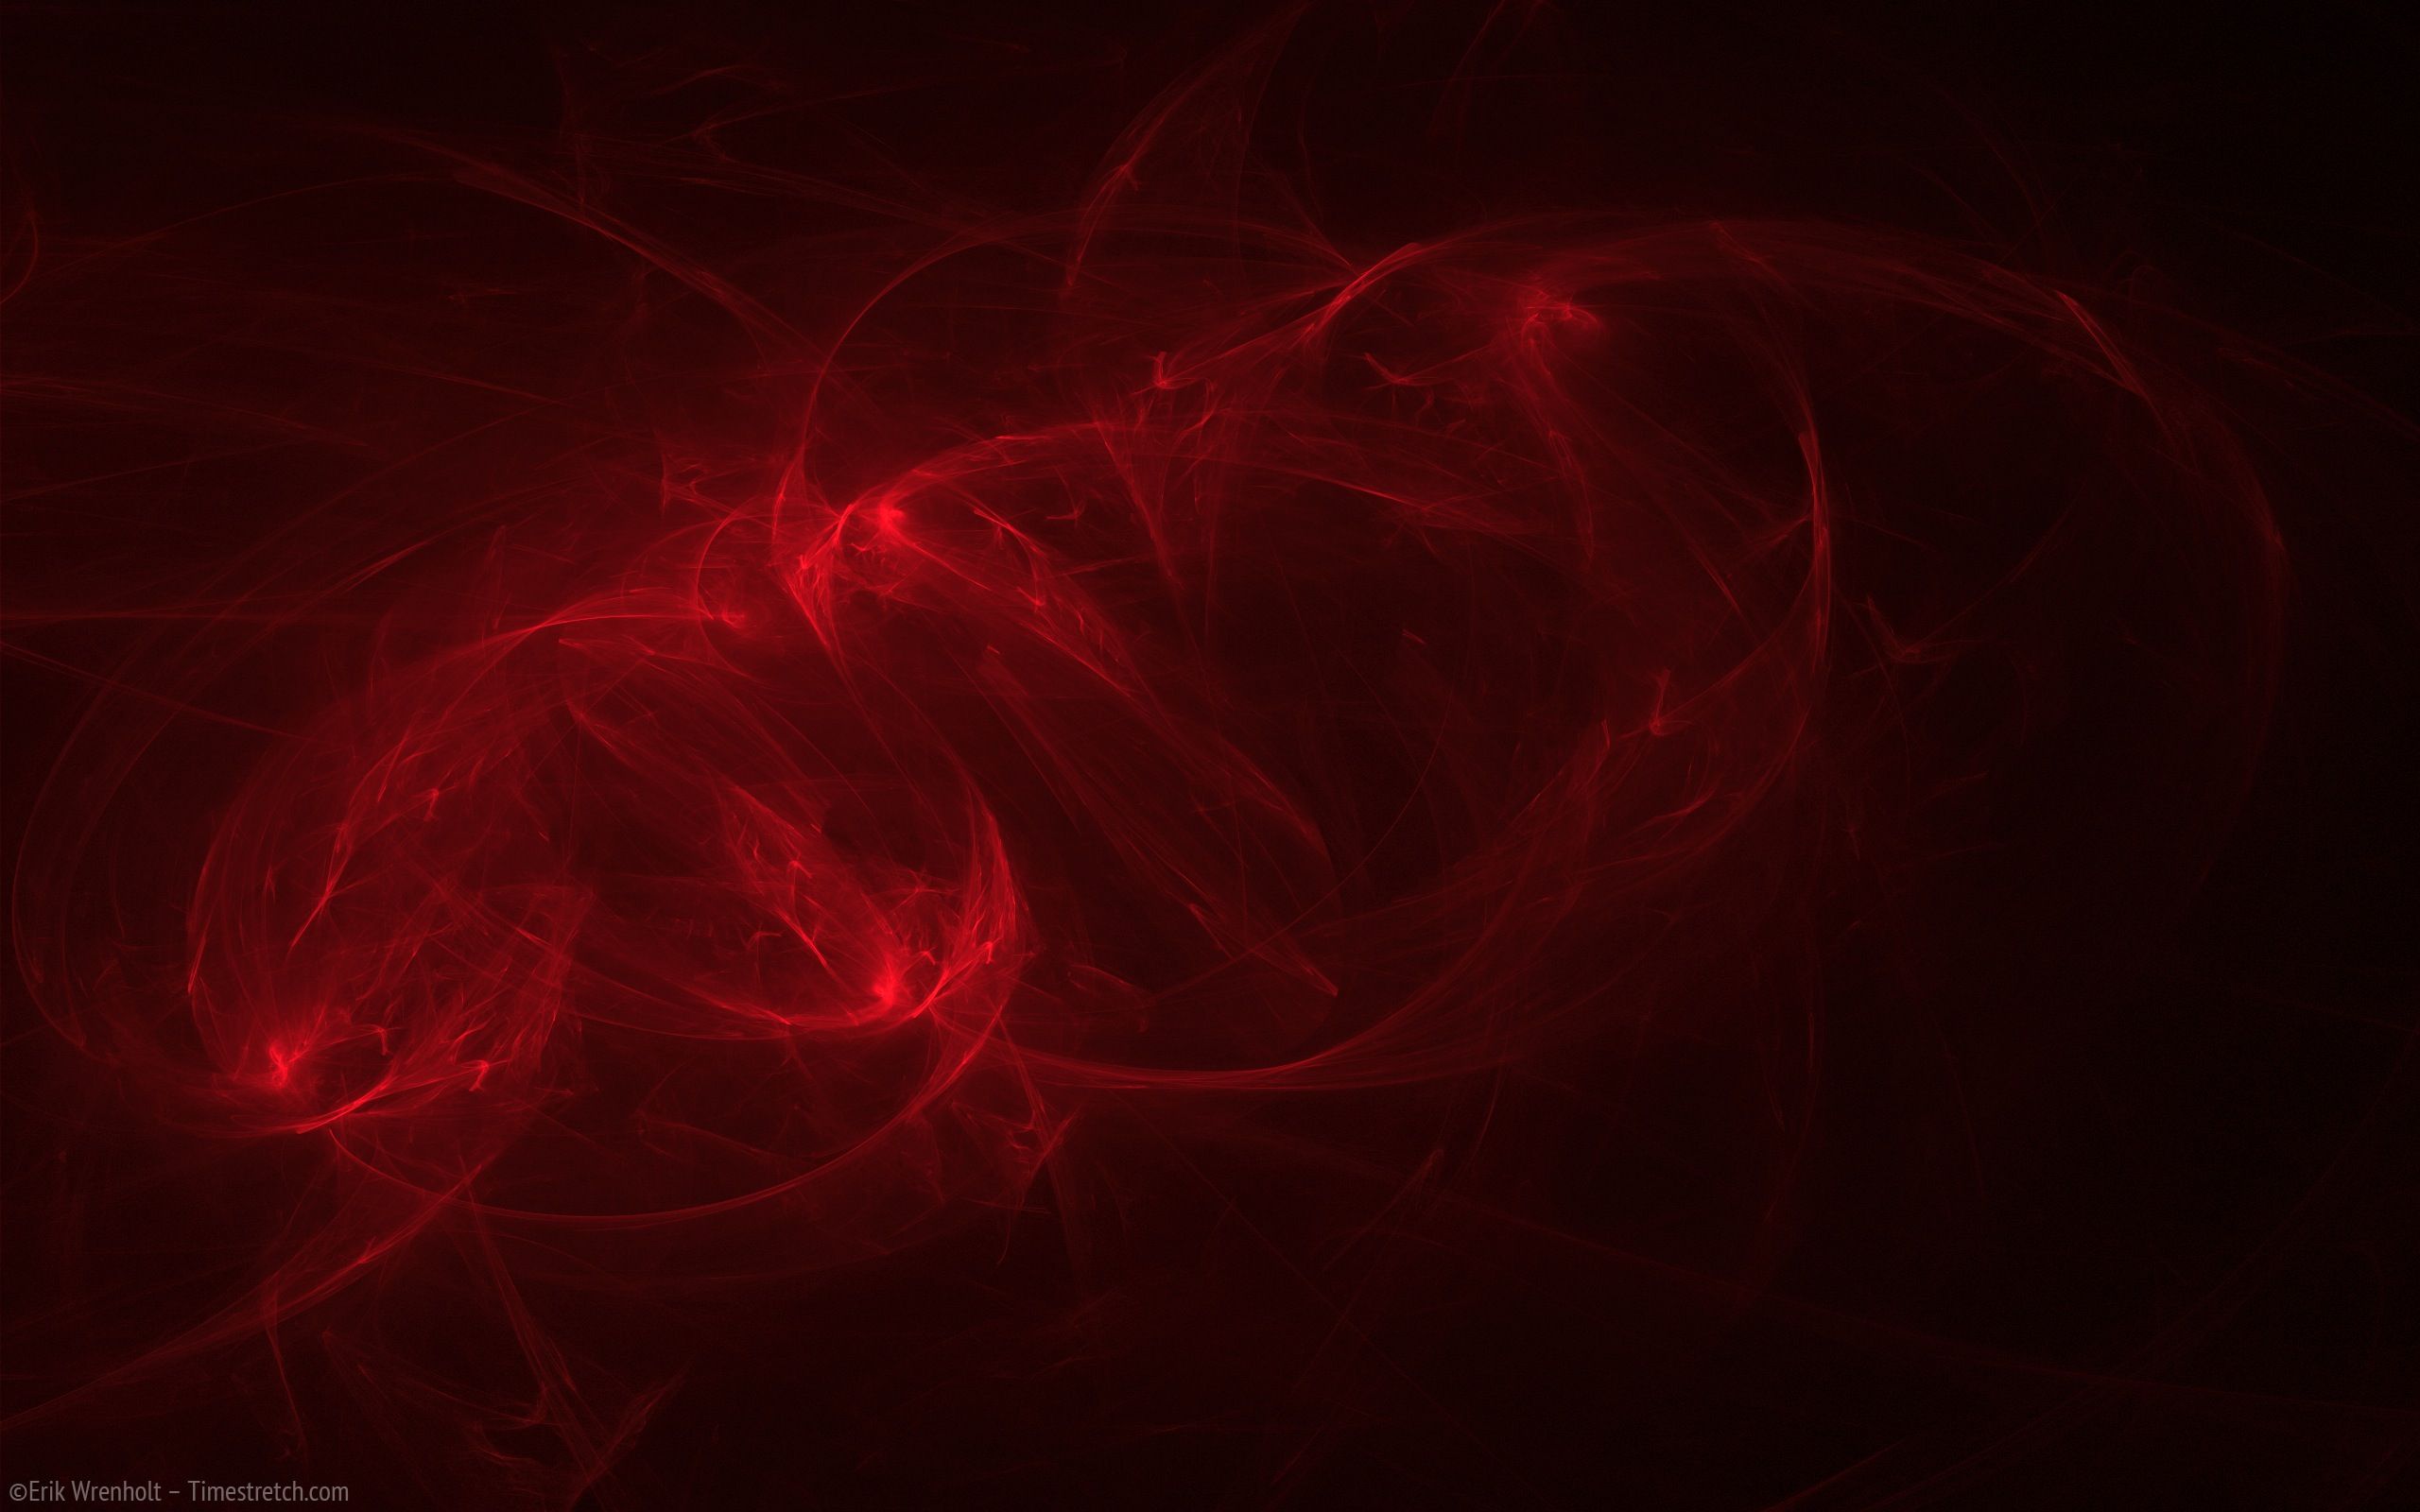 4k Red And Black Smoke Wallpapers Wallpaper Cave